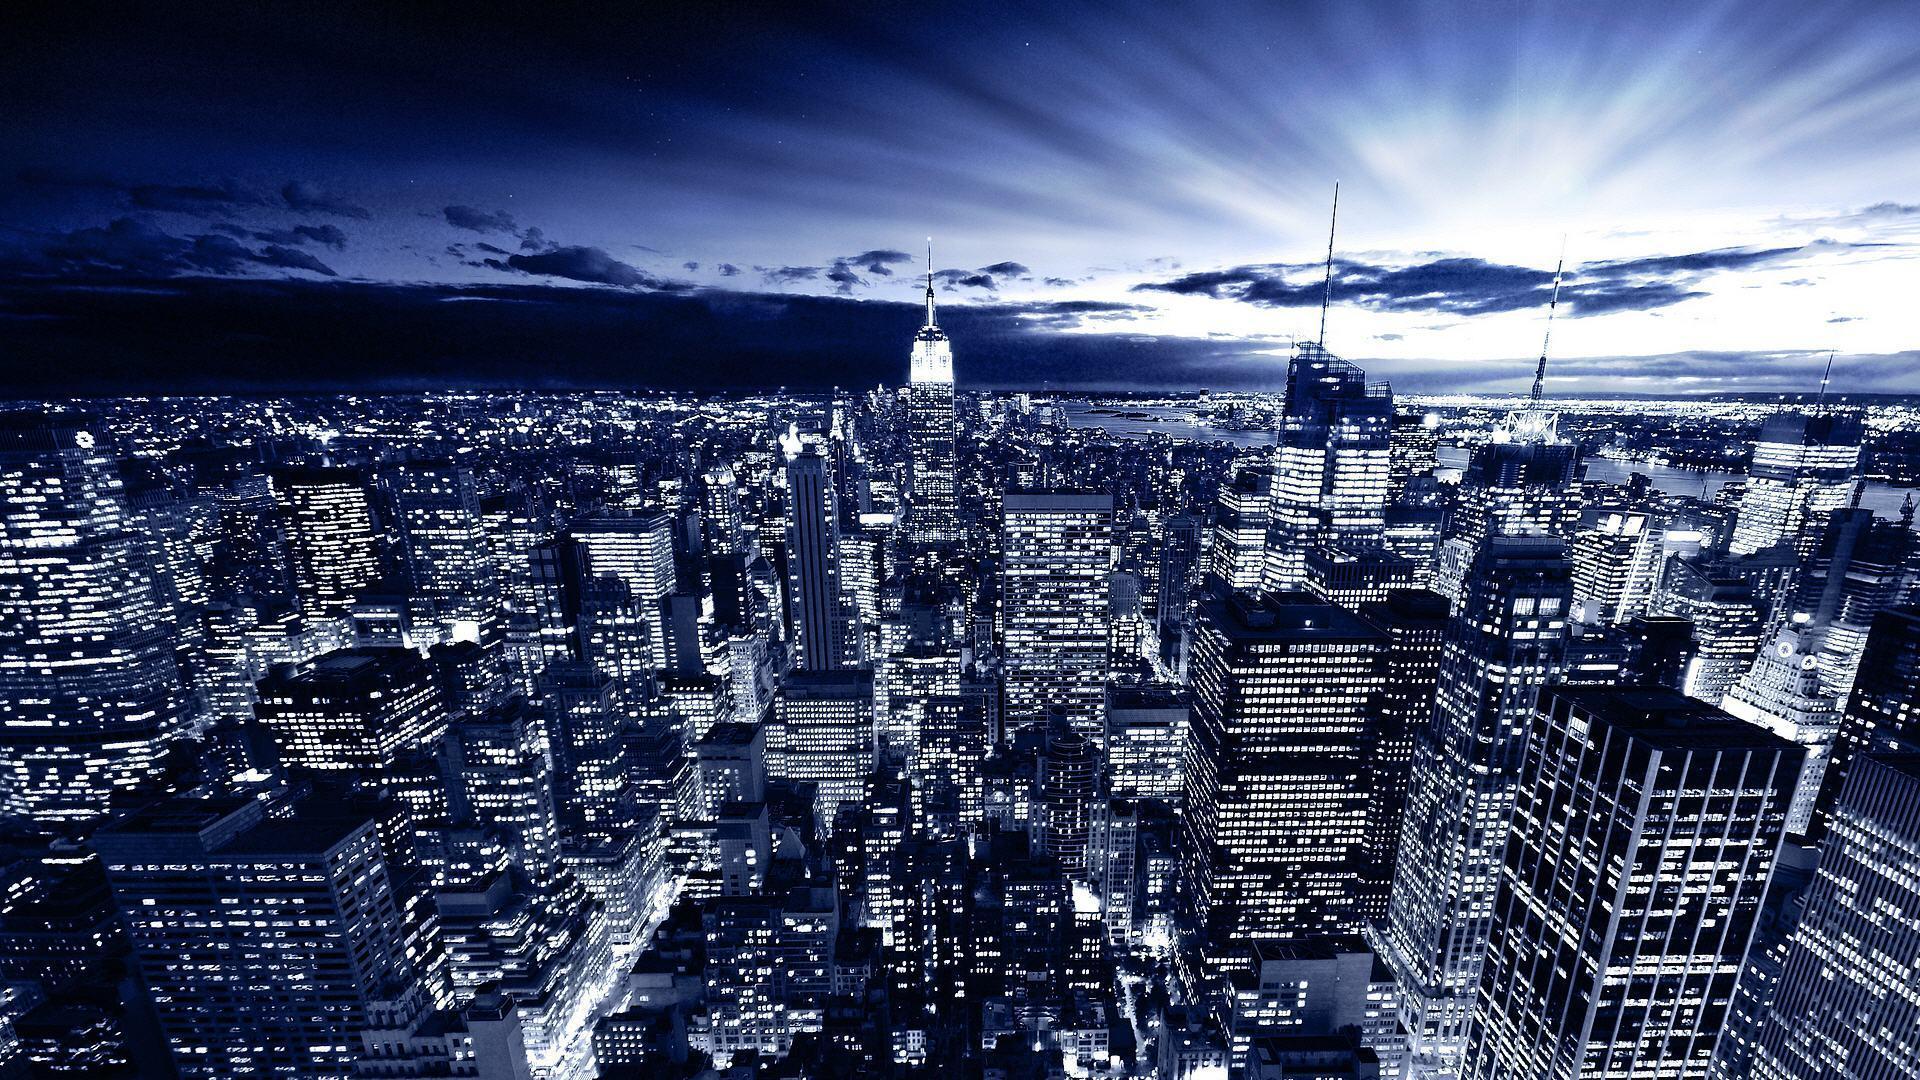 Blue City Night Wallpapers - Top Free Blue City Night Backgrounds